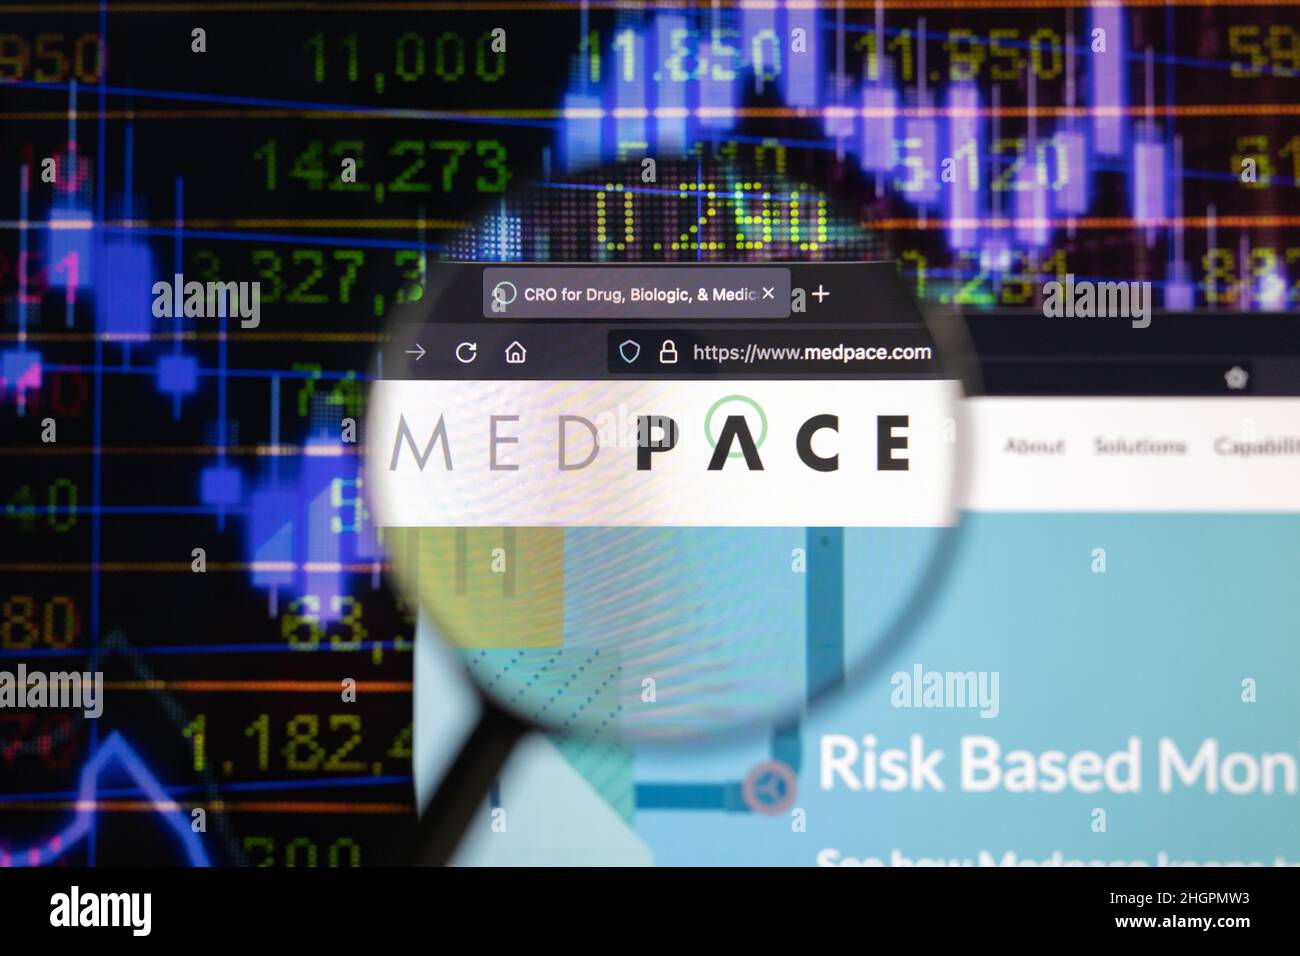 Medpace company logo on a website with blurry stock market developments in the background, seen on a computer screen through a magnifying glass. Stock Photo